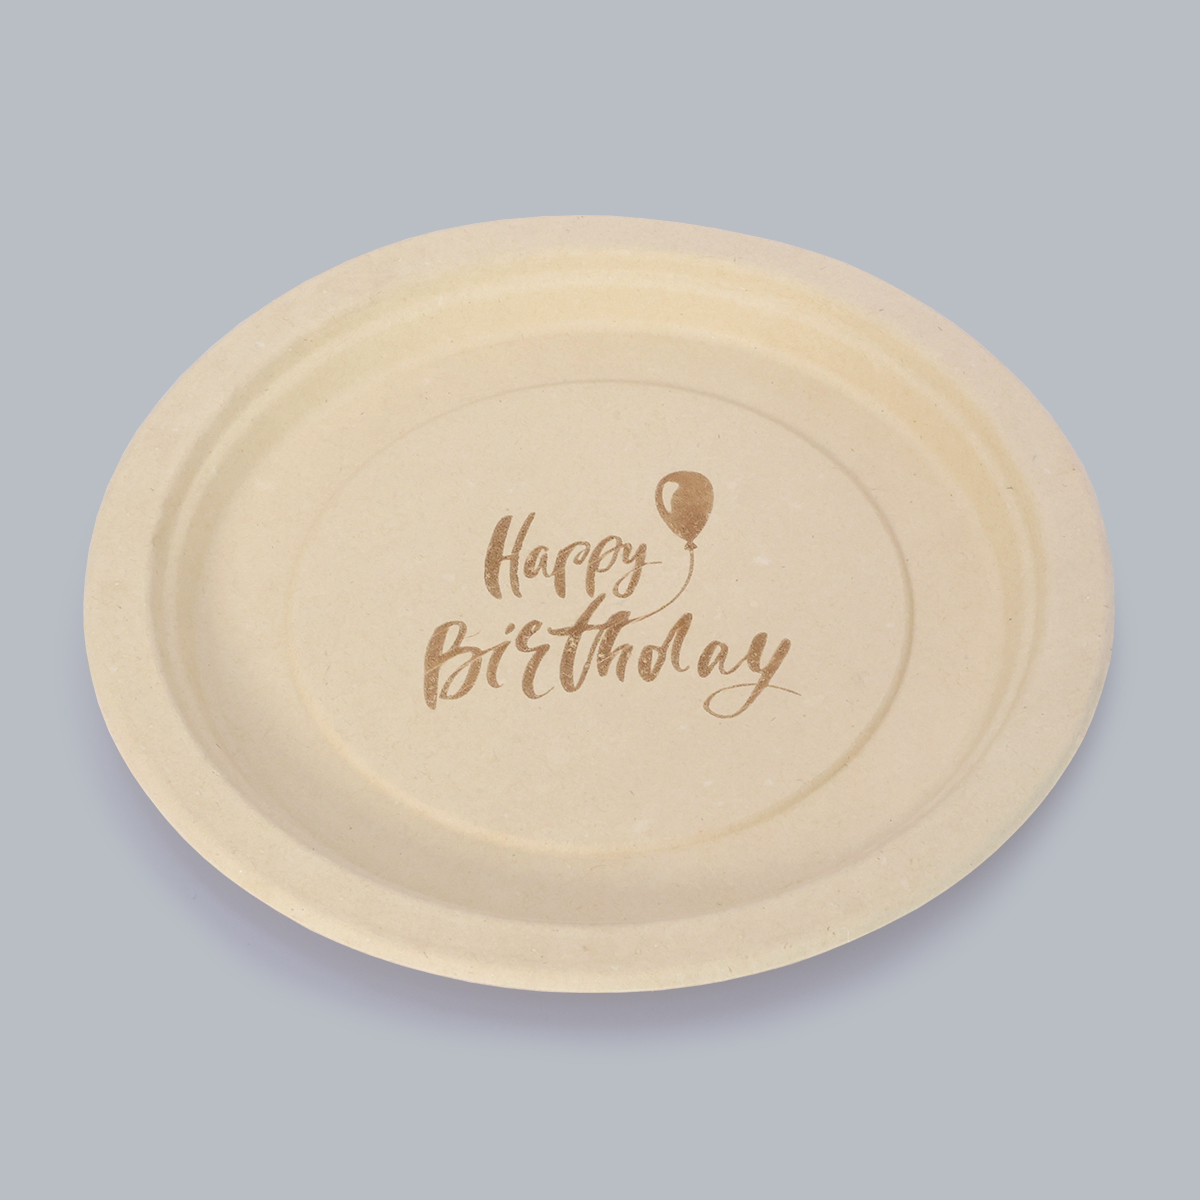 Compostable Food Trays Eco-Friendly Party Supplies Eco-Friendly Plates